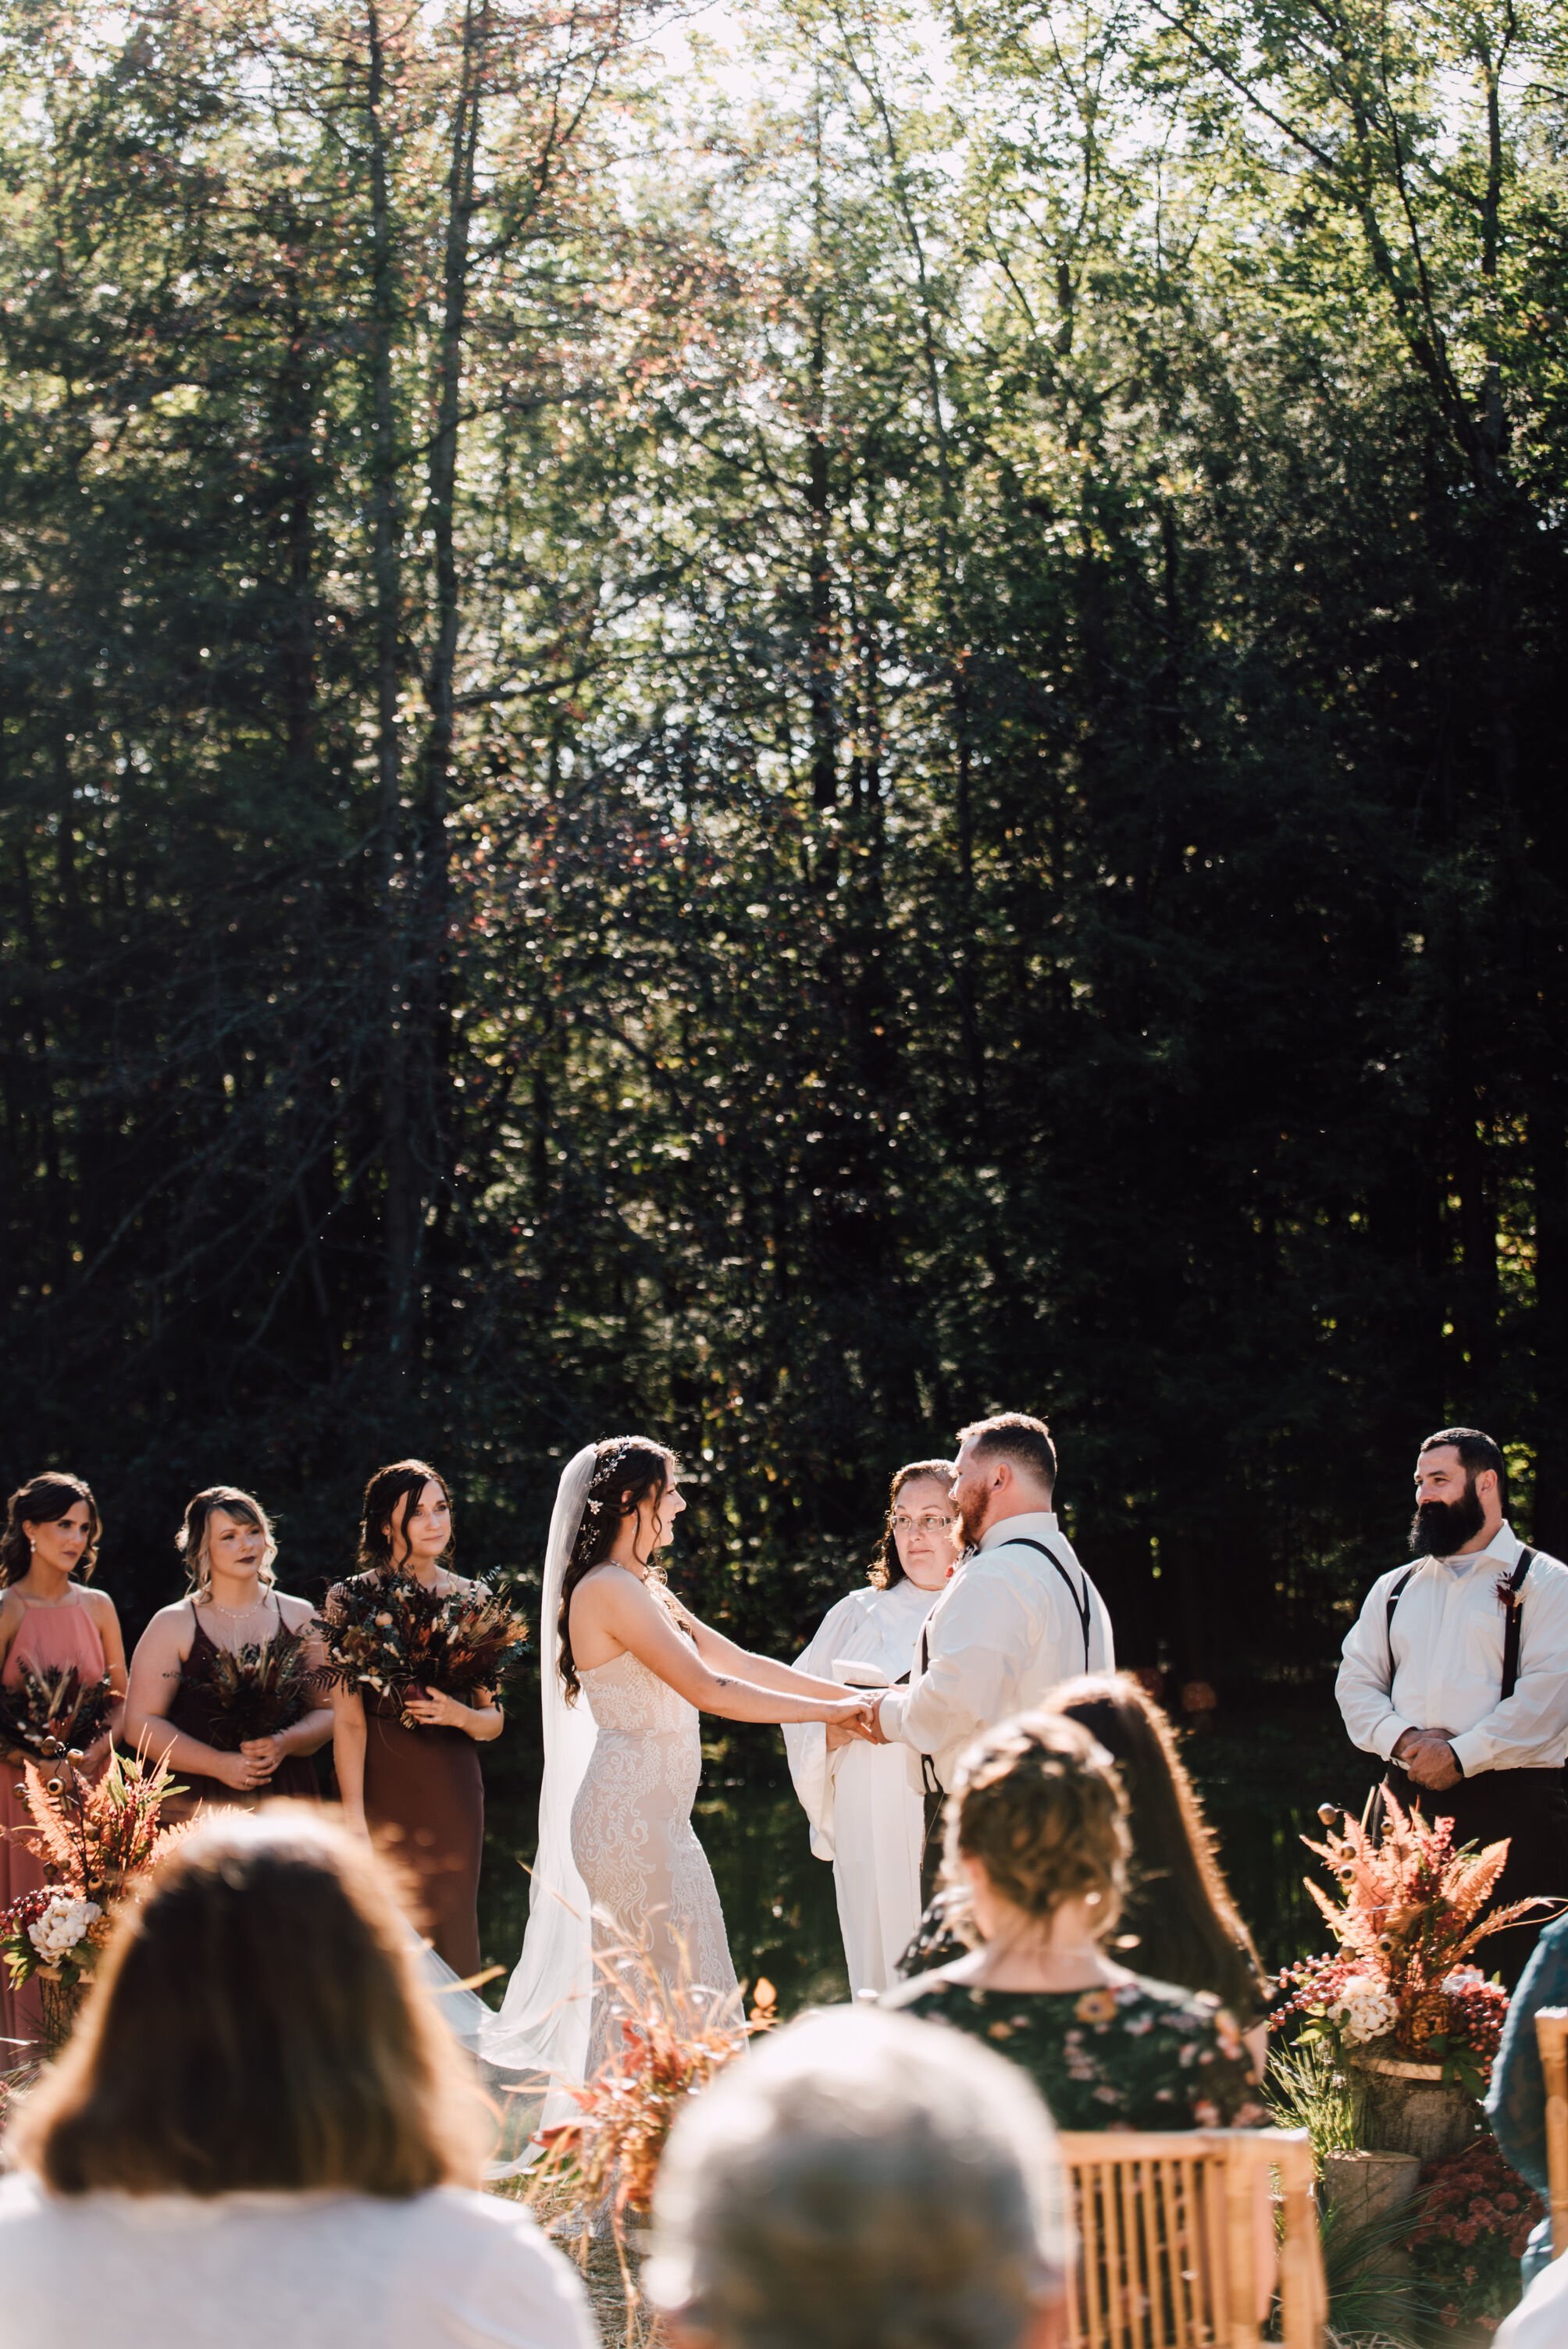  The bride and groom stand together holding hands at their outdoor fall wedding ceremony 